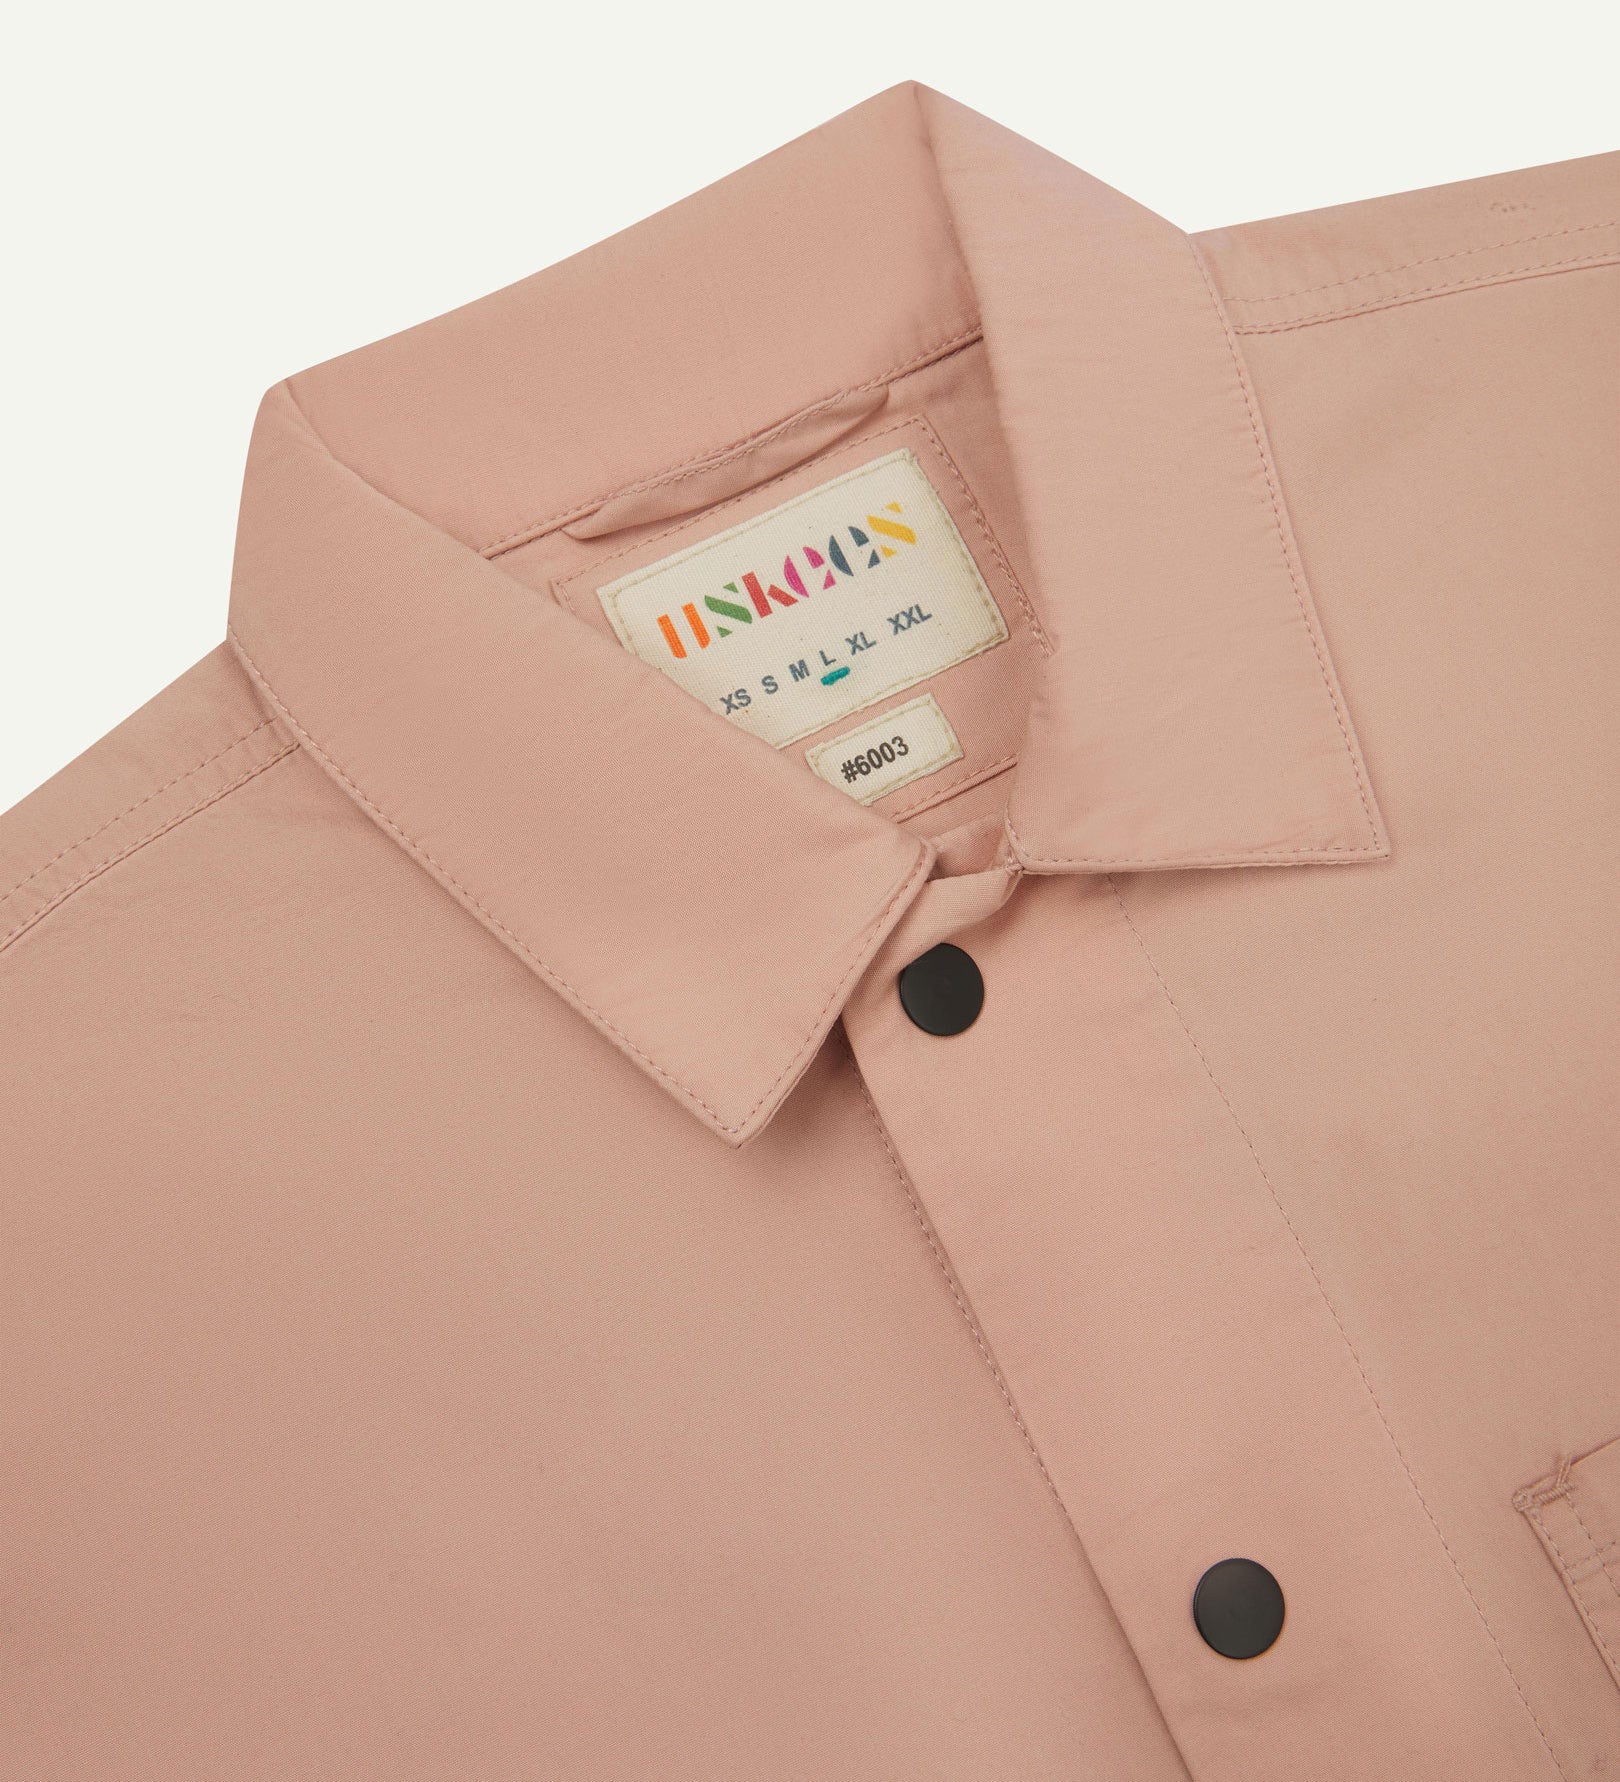 Close-up view of the #6003 reinforced shirt collar, showing weave of dusty pink organic cotton, contrast press studs and Uskees branding label.